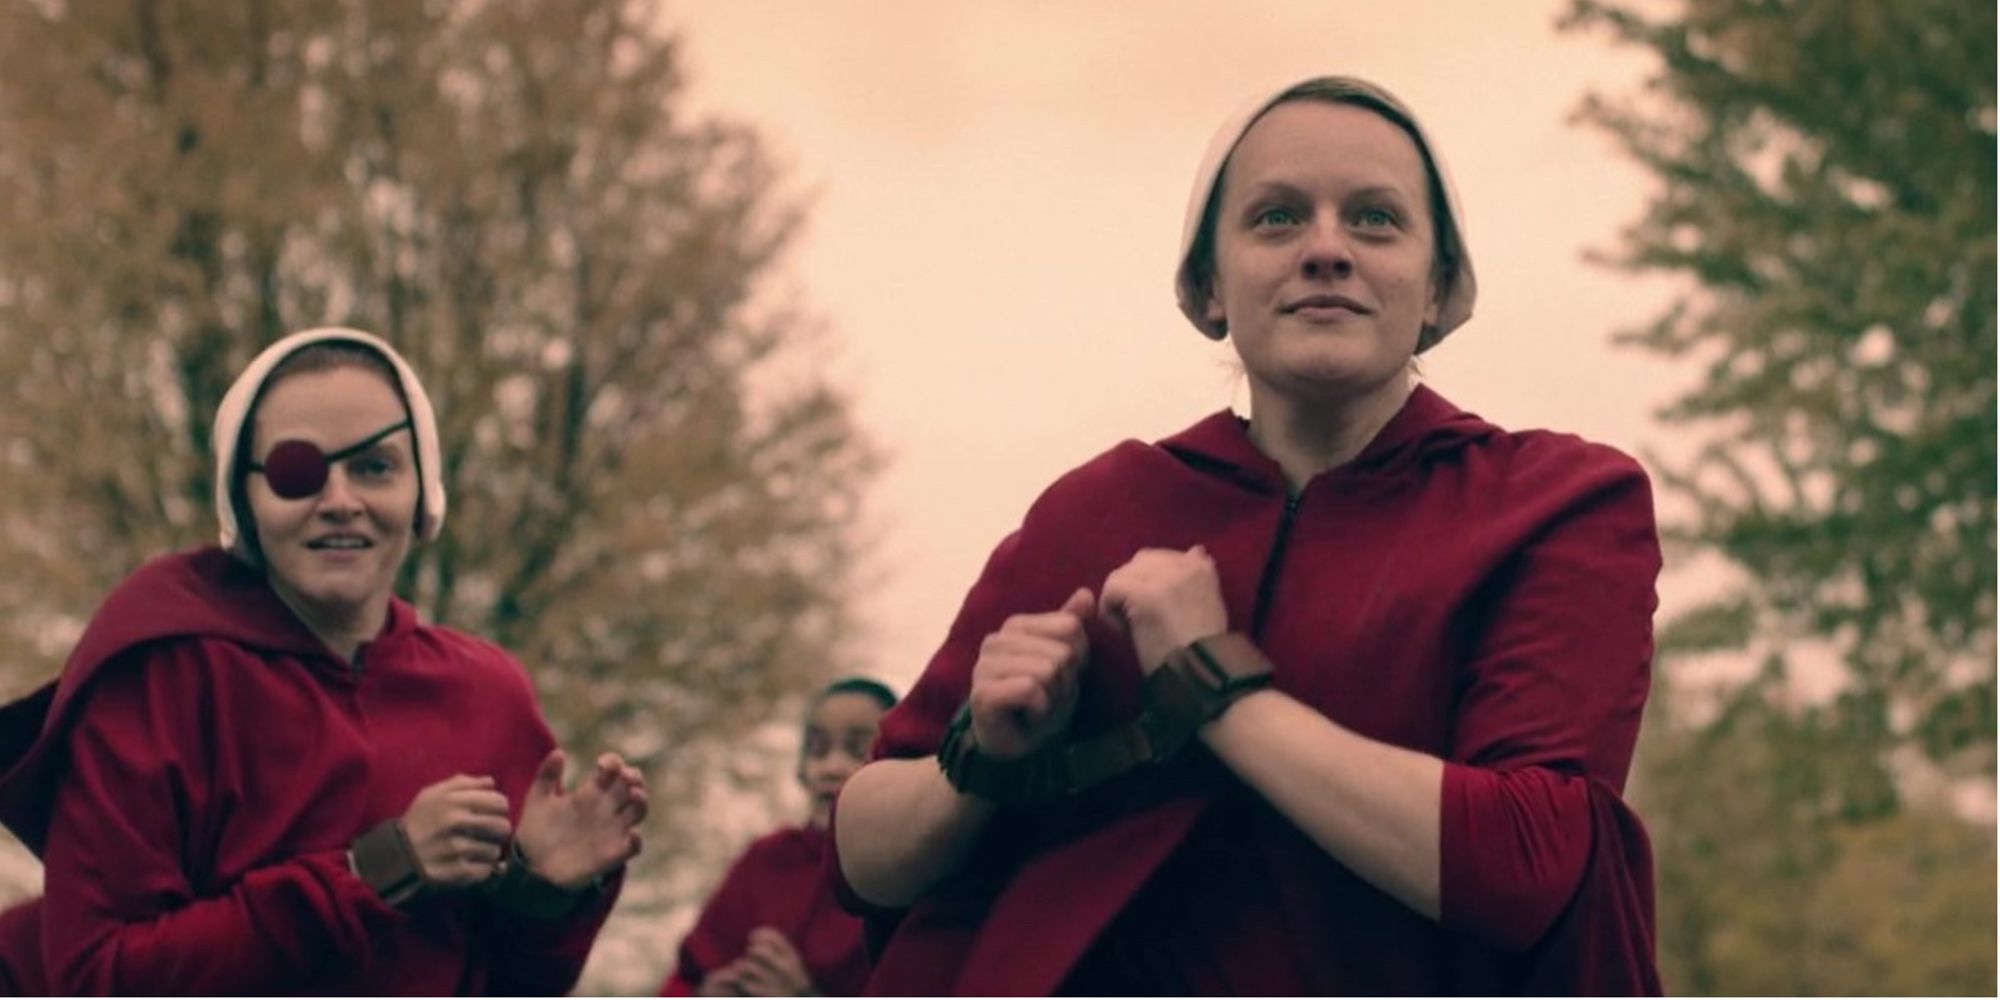 June, Janine, and other handmaids run away with their hands cuffed